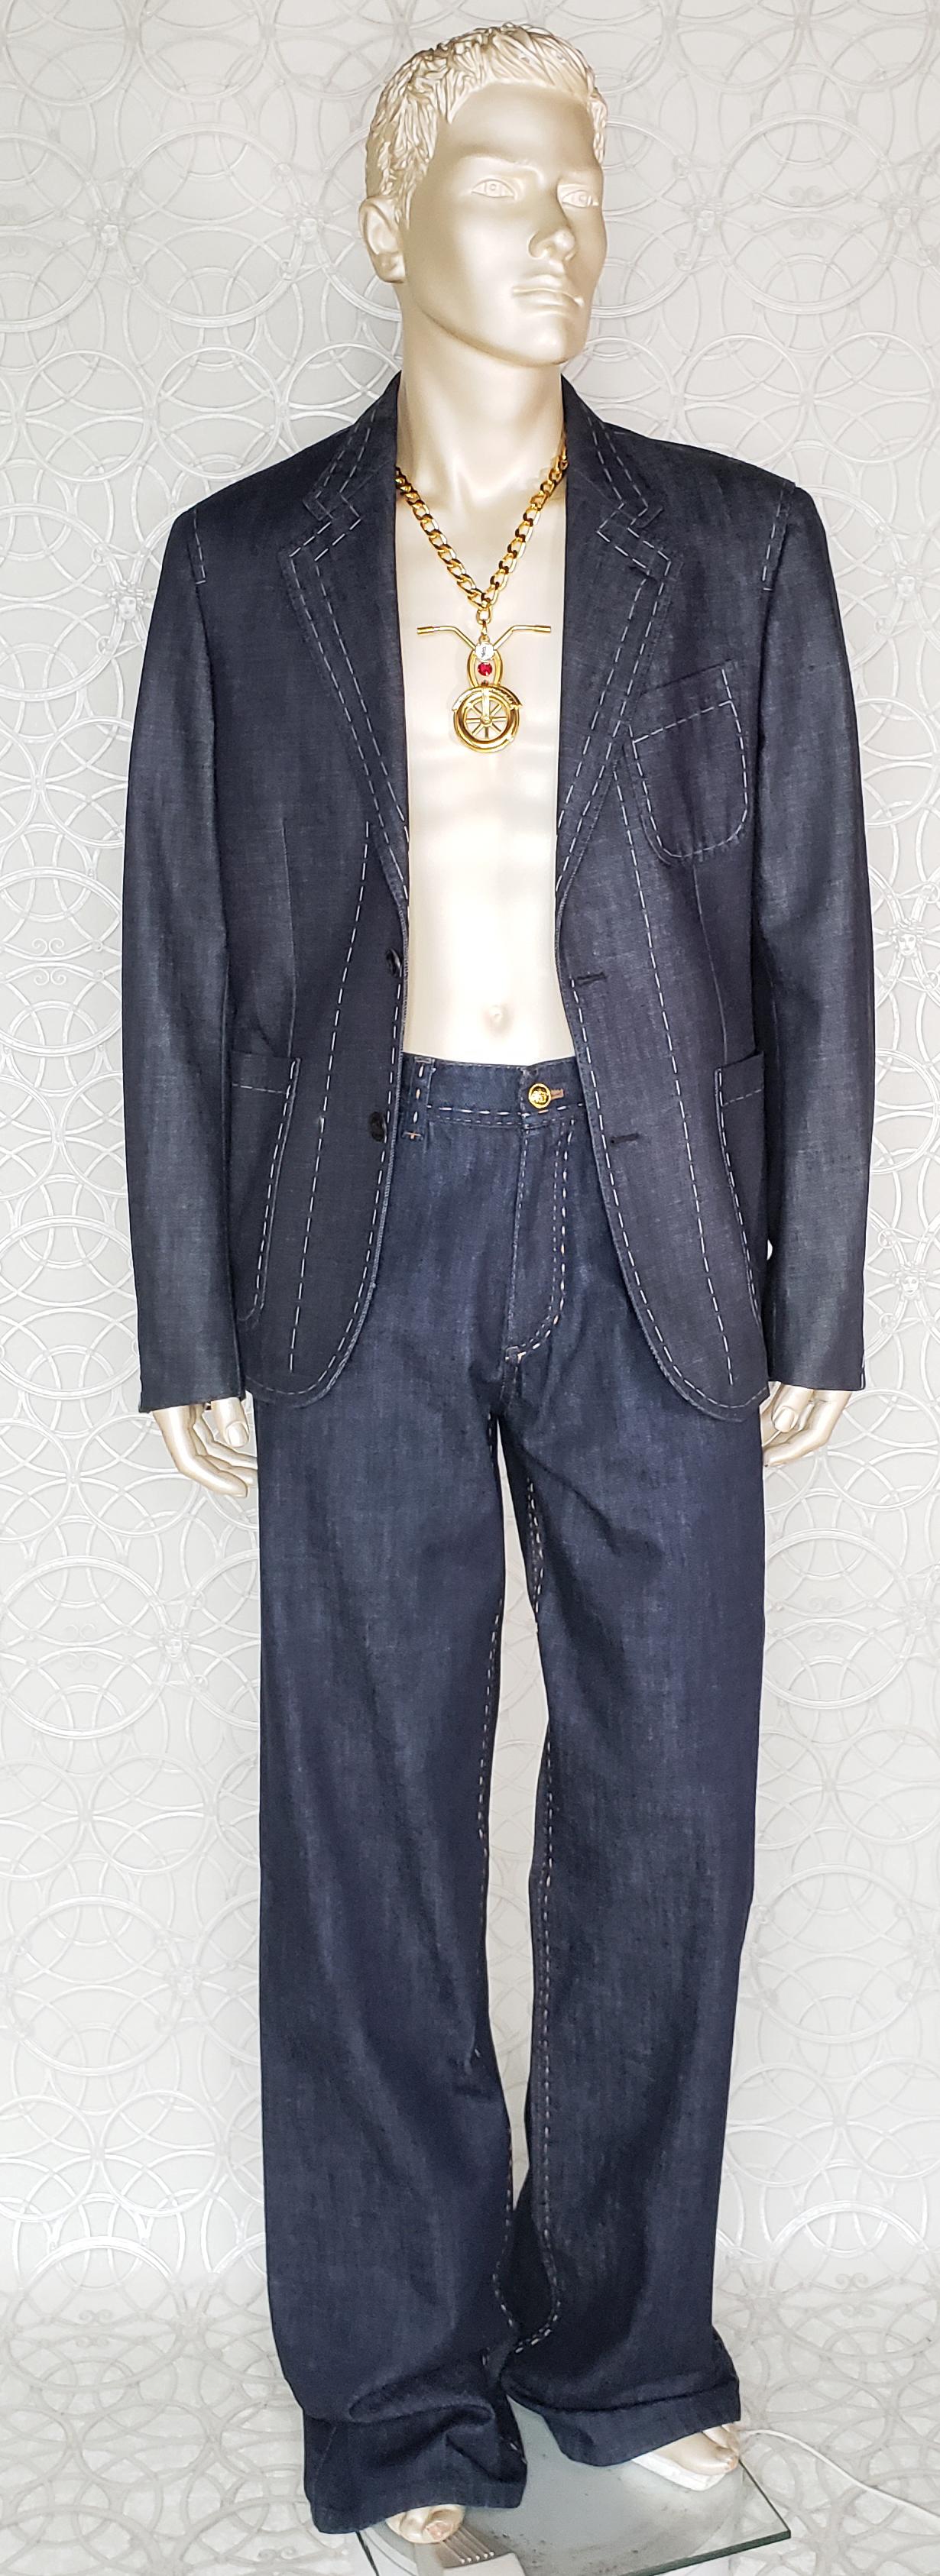 F/W 2015 look #30 NEW VERSACE JEANS SUIT For Sale 3